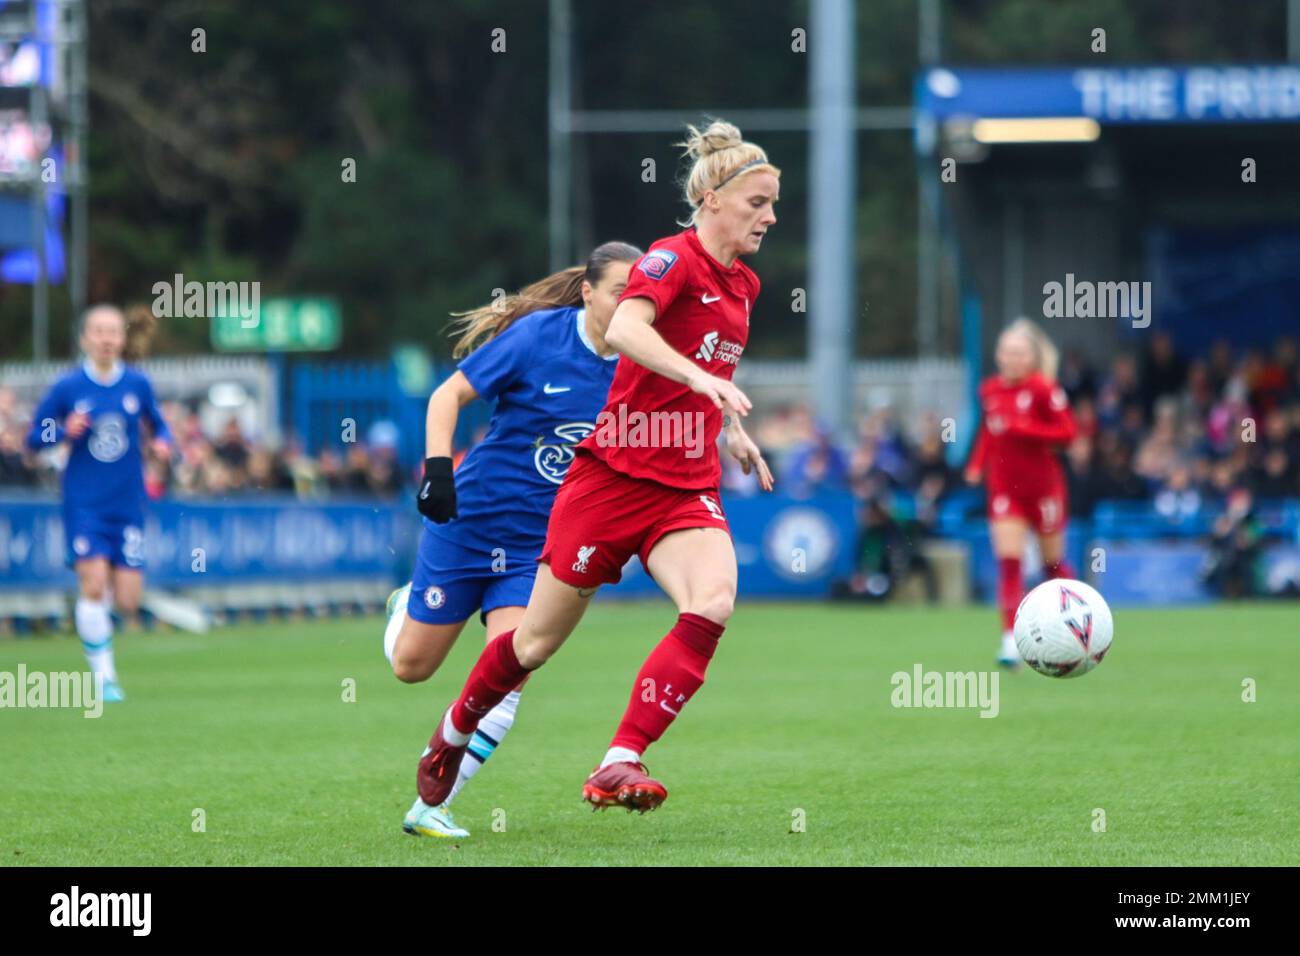 Kingsmeadow, UK. 29th Jan, 2023. Jasmine Matthews (6 Liverpool) in action during the Vitality Womens FA Cup game between Chelsea and Liverpool at kingsmeadow. (Tom Phillips/SPP) Credit: SPP Sport Press Photo. /Alamy Live News Stock Photo